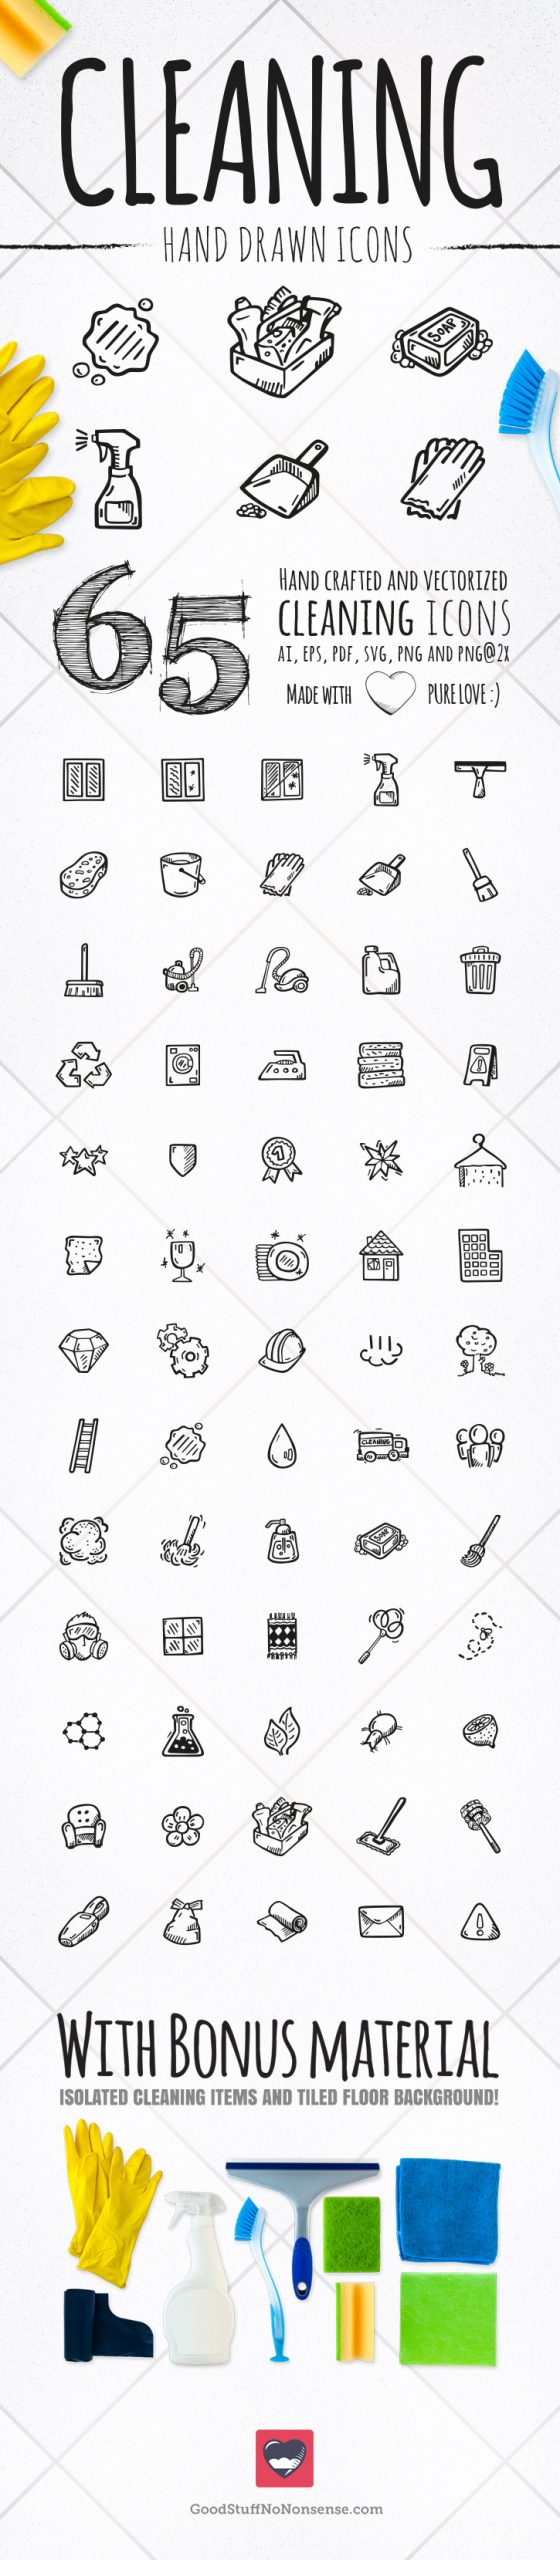 Hand Drawn Cleaning Icons—Cleaner Service Vector Pack Full